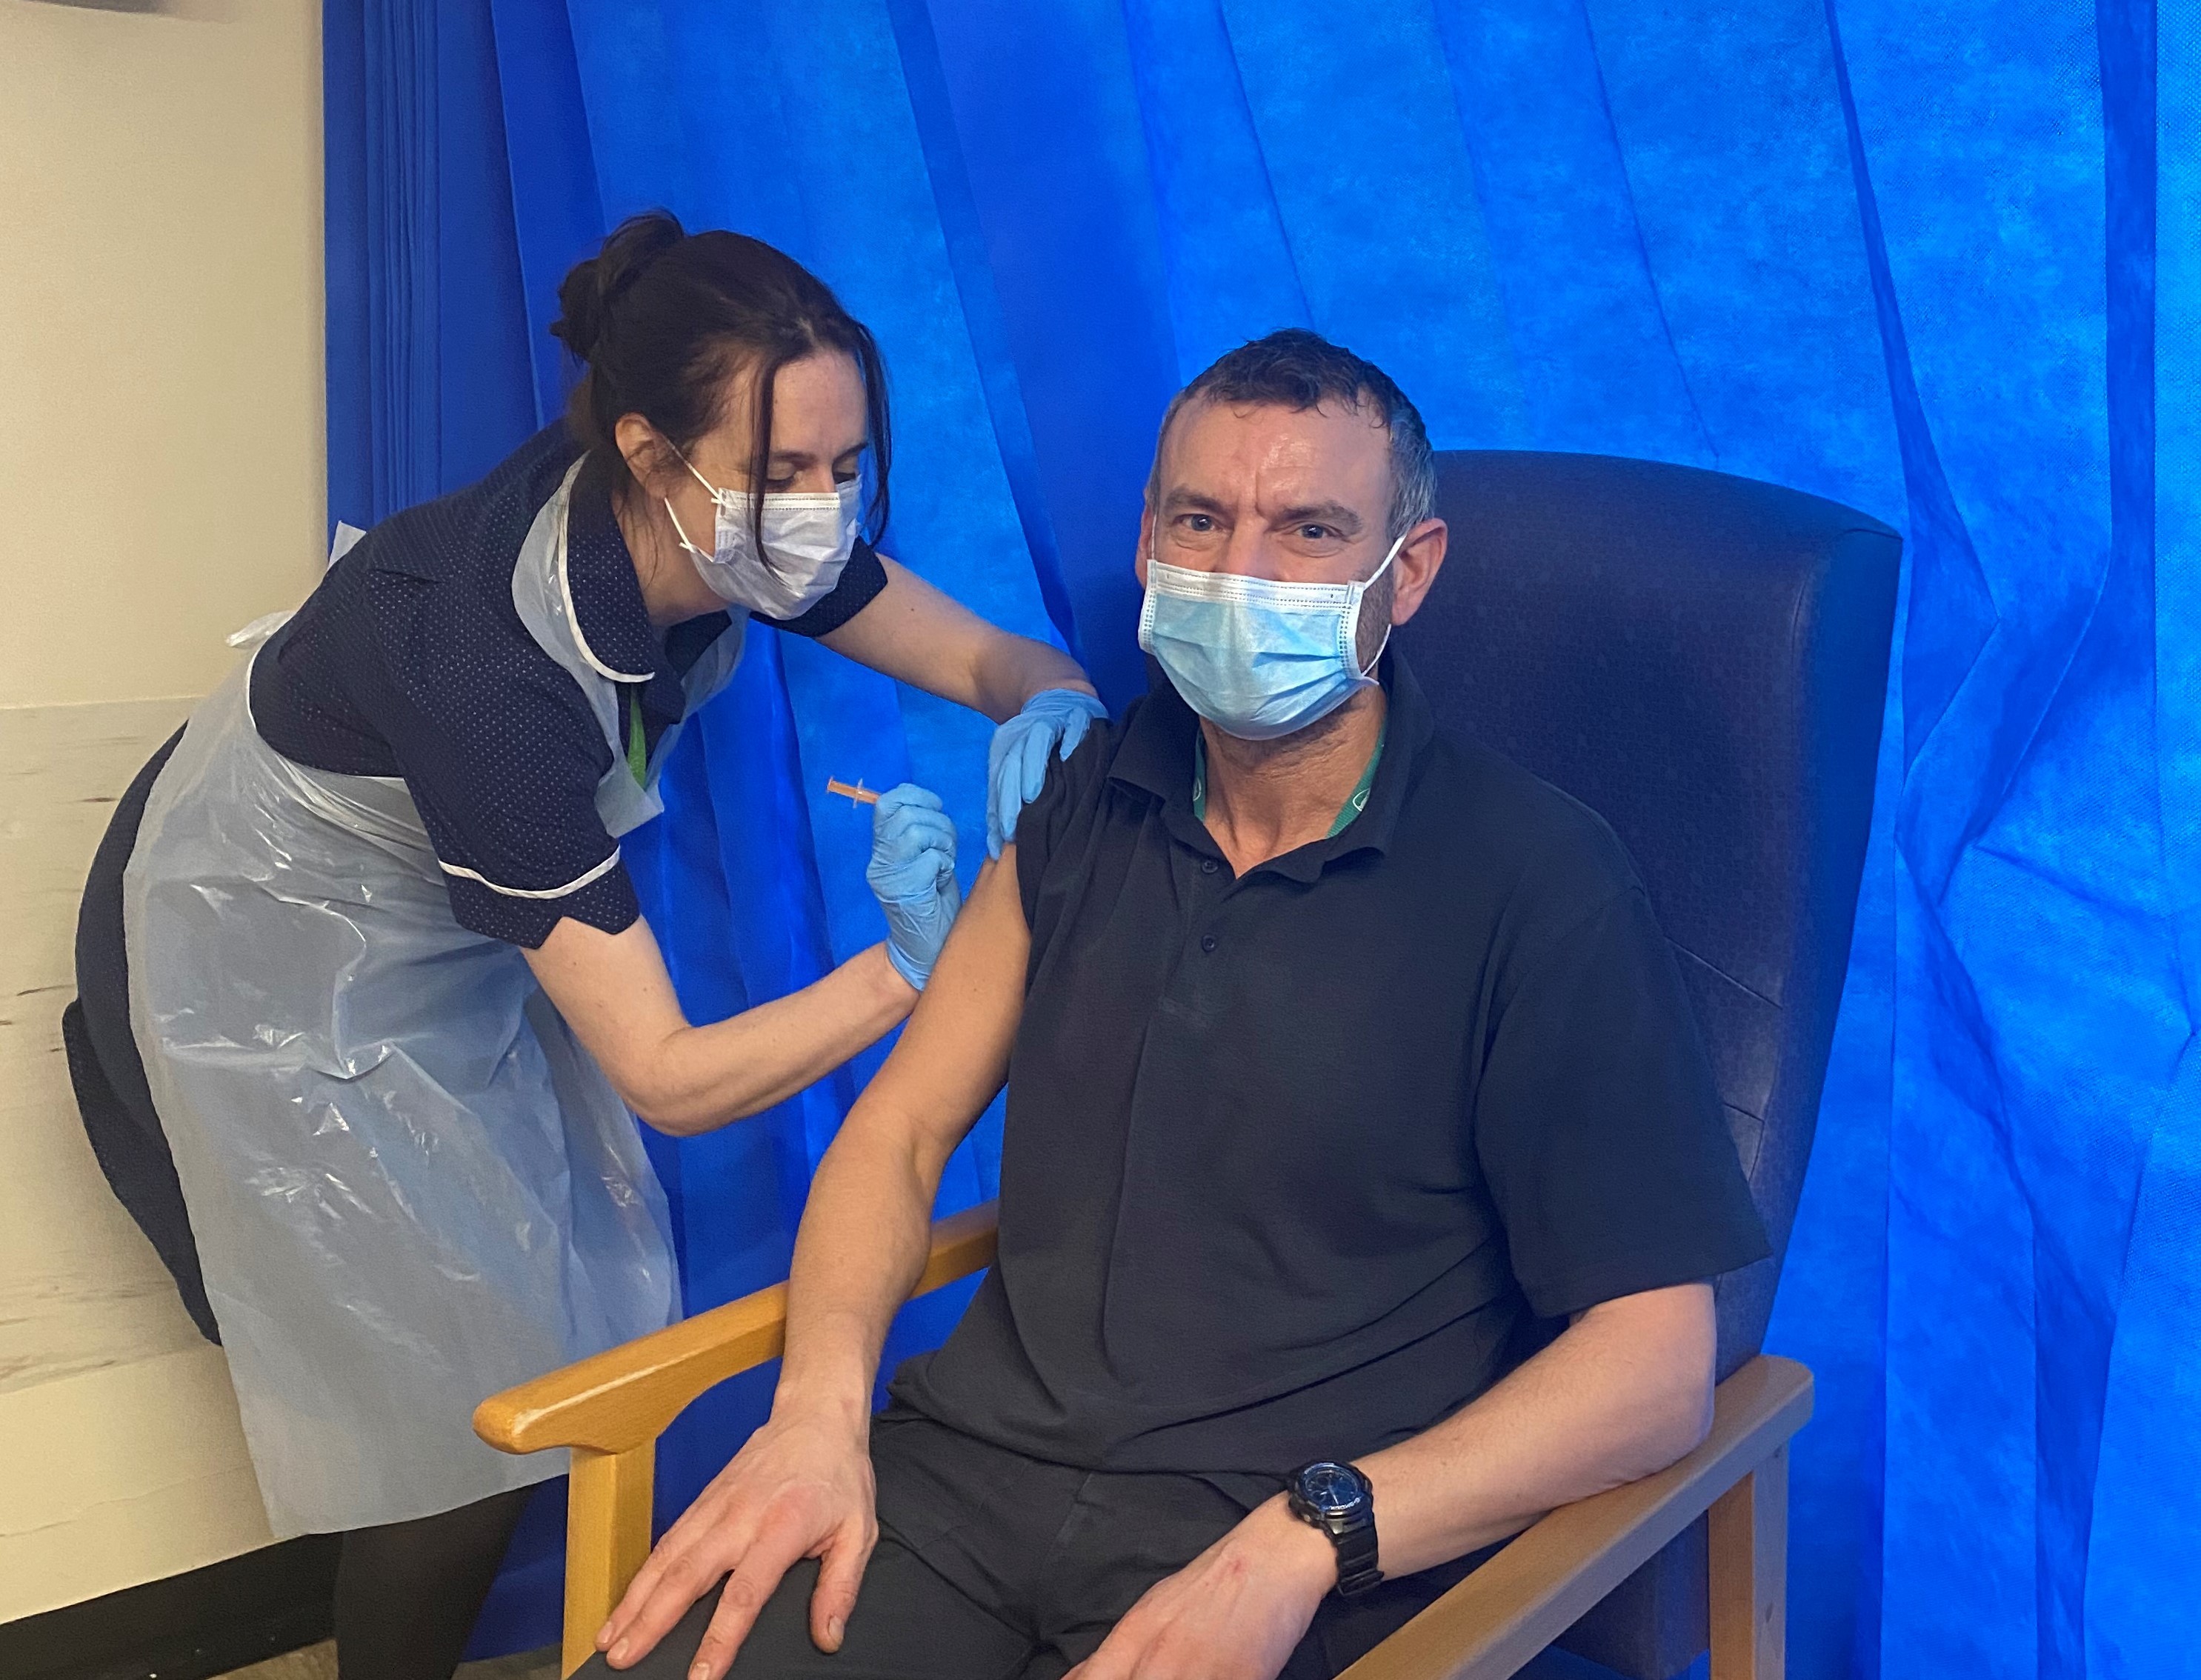 Clive Cwaczko Electrical Tradesman WGH receiving his Oxford vaccination UHMBT 2.jpg